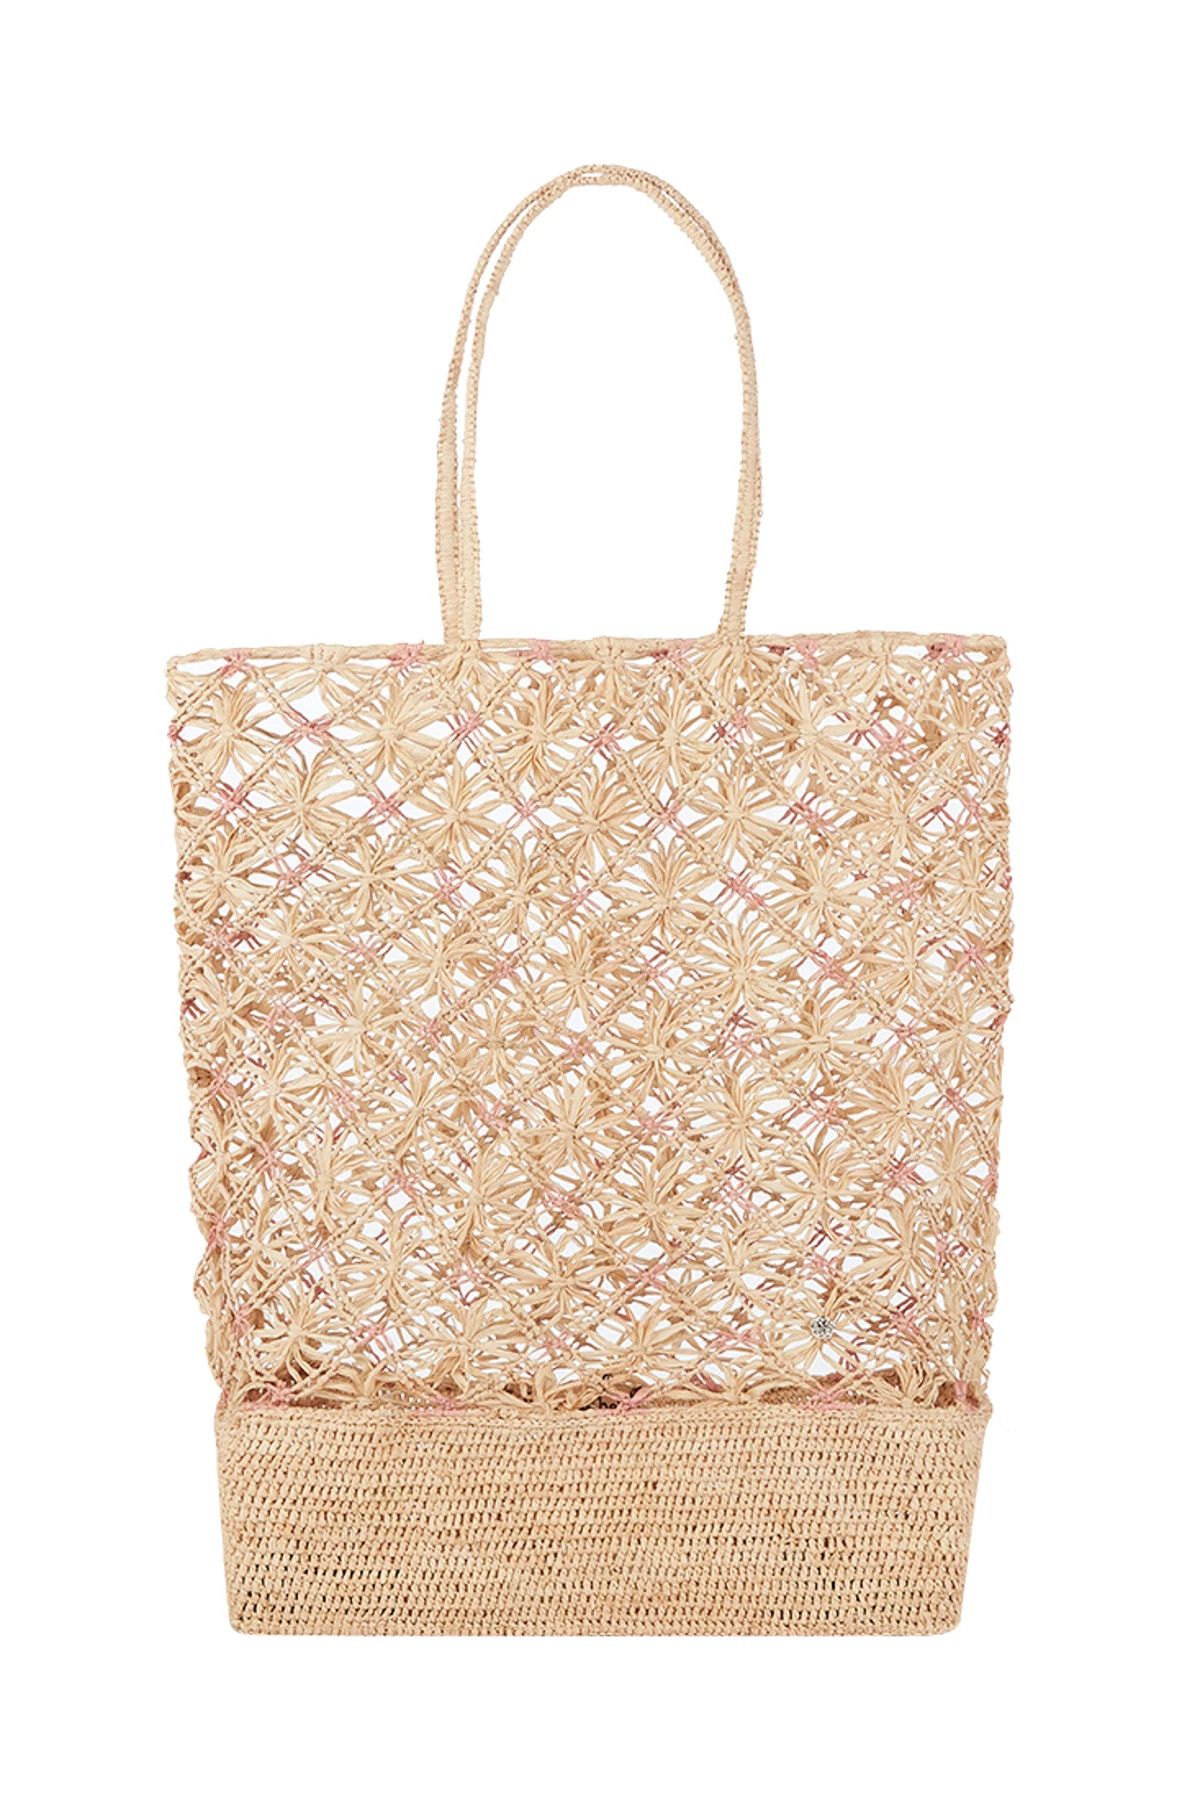 Monrovia Woven Tote | Everything But Water